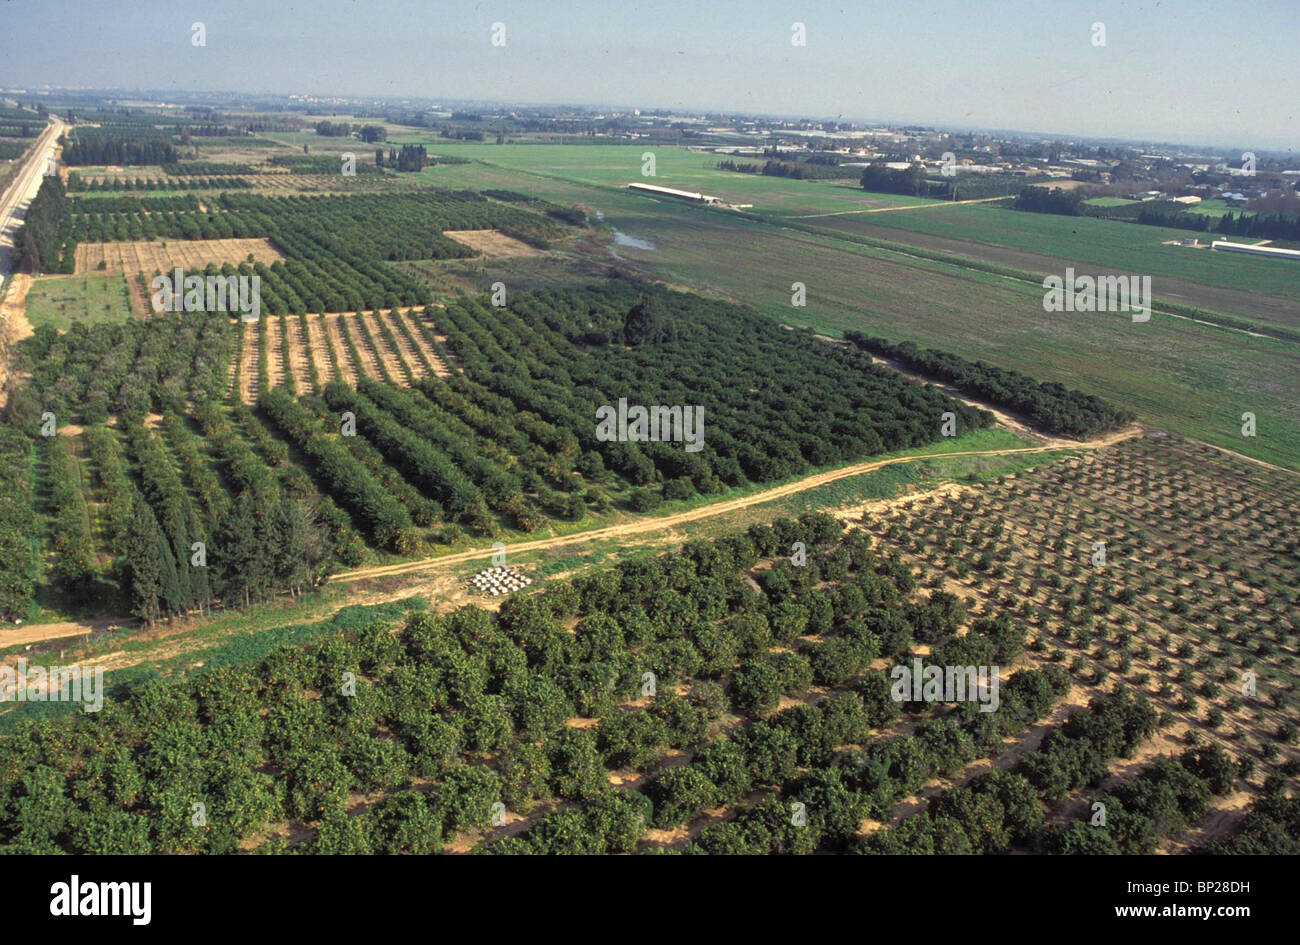 2087-the-sharon-area-flatlands-of-central-israel-orange-groves-and-BP28DH.jpg